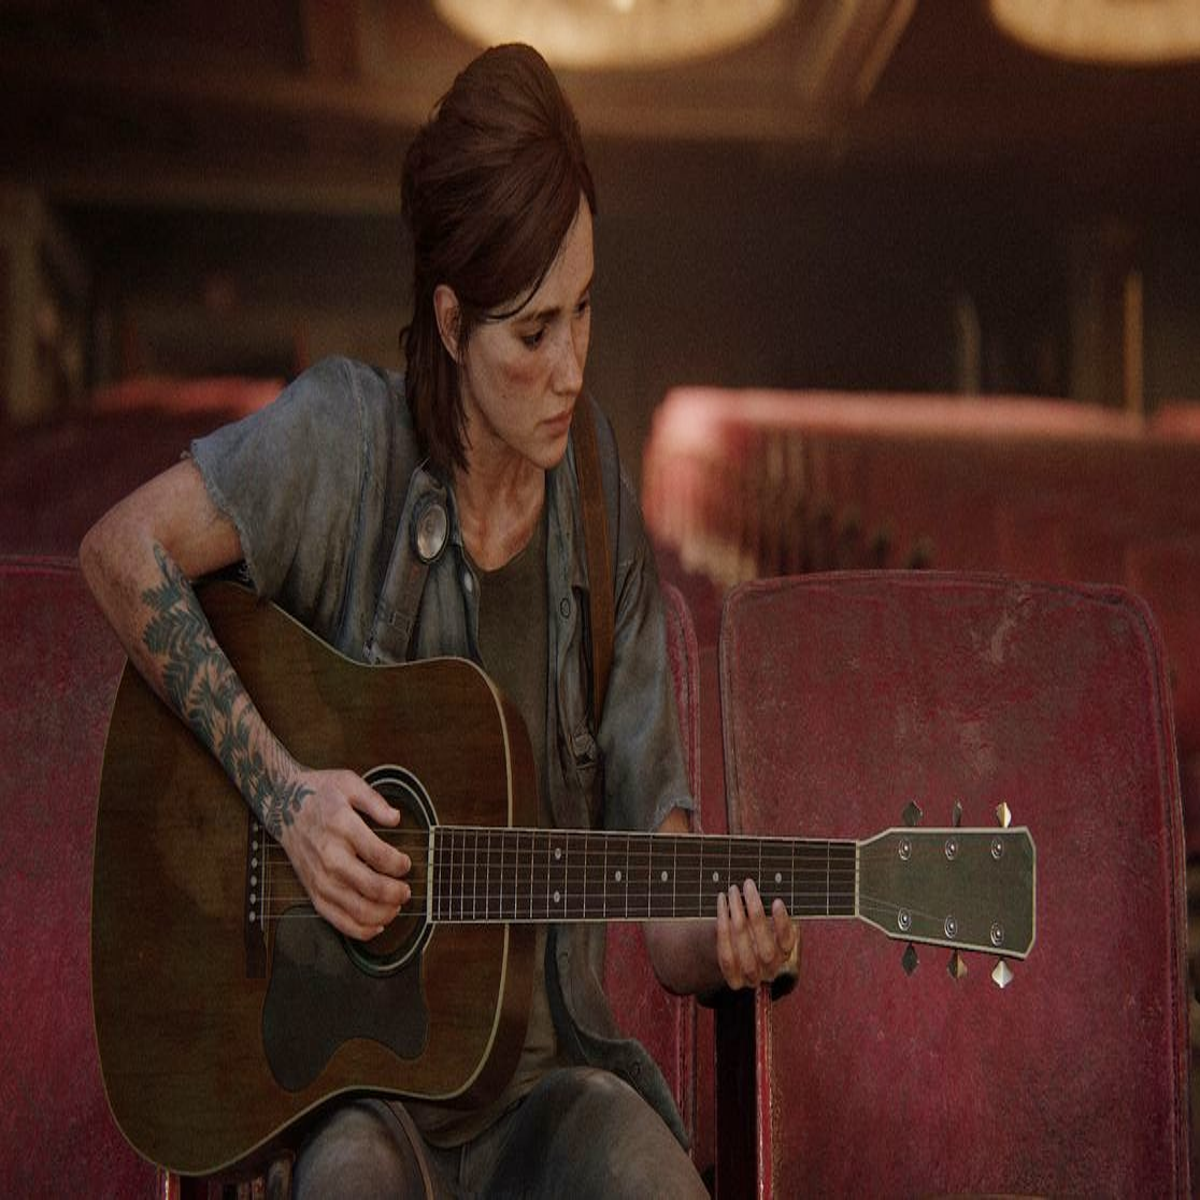 New 'The Last of Us Part 3' Details Reveal New Characters, Ellie's Return,  Plus More